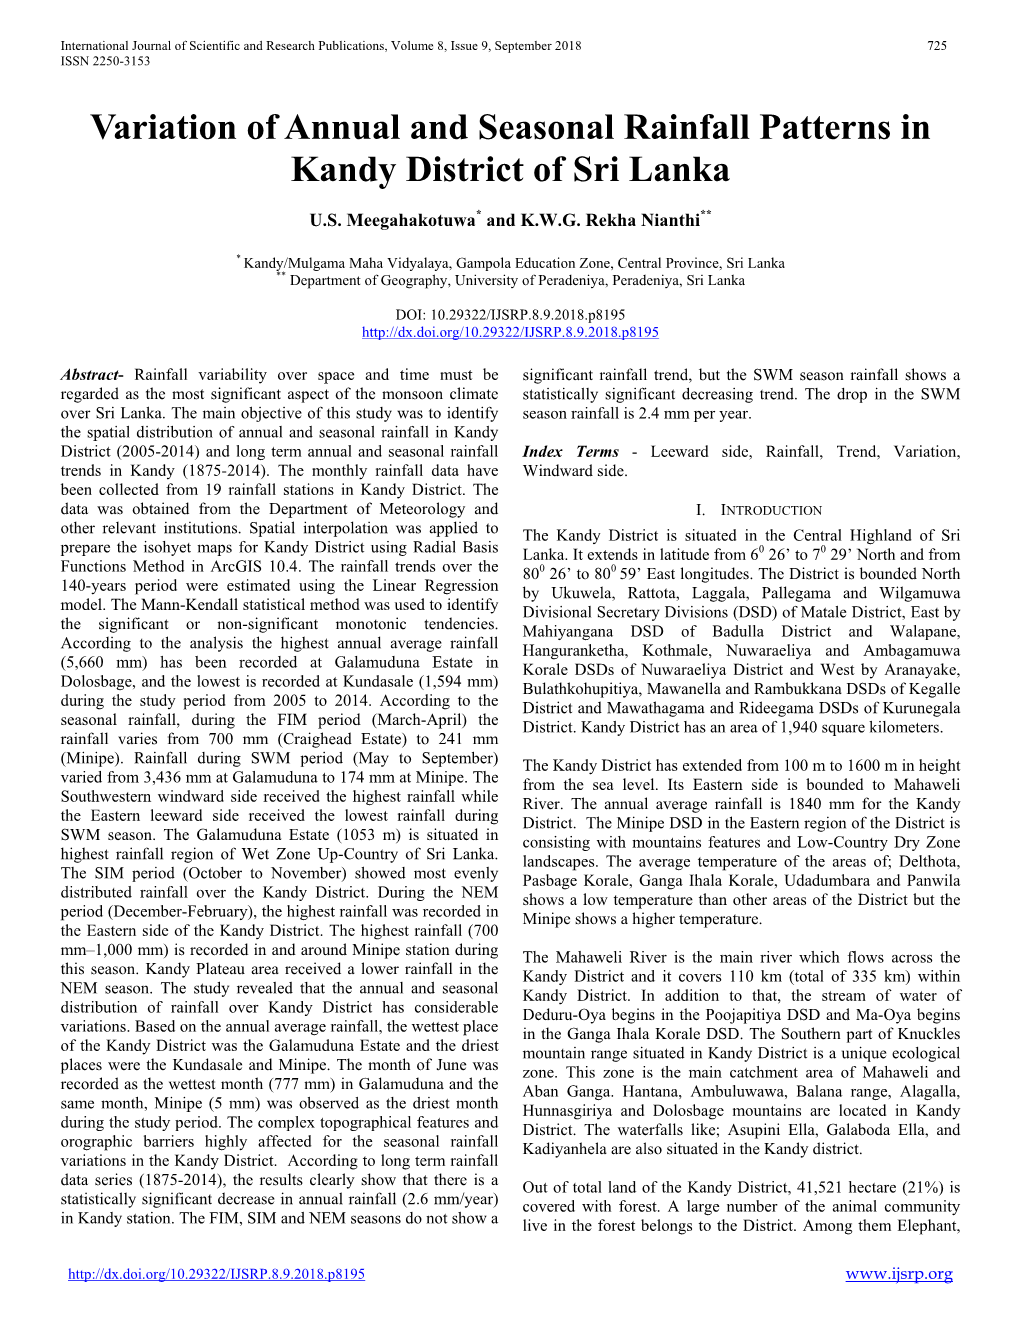 Variation of Annual and Seasonal Rainfall Patterns in Kandy District of Sri Lanka